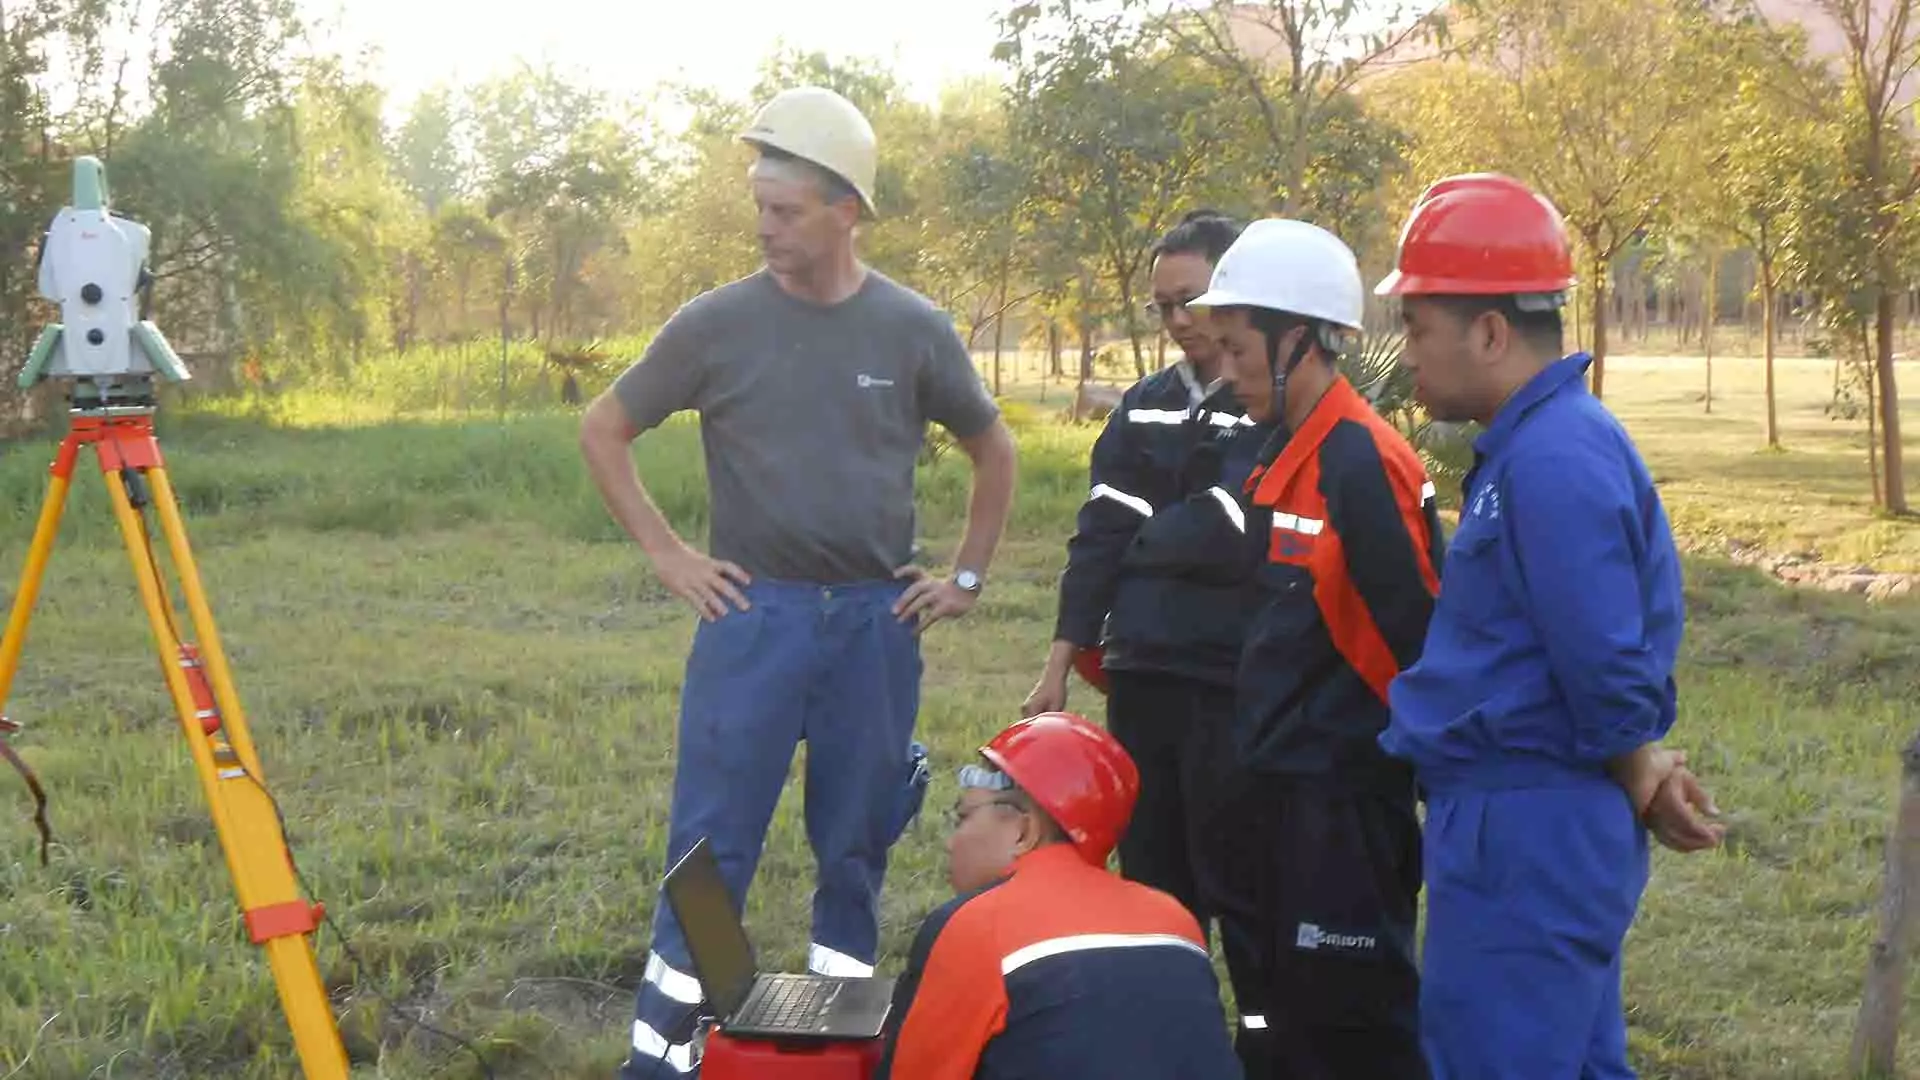 kiln alignment training at site